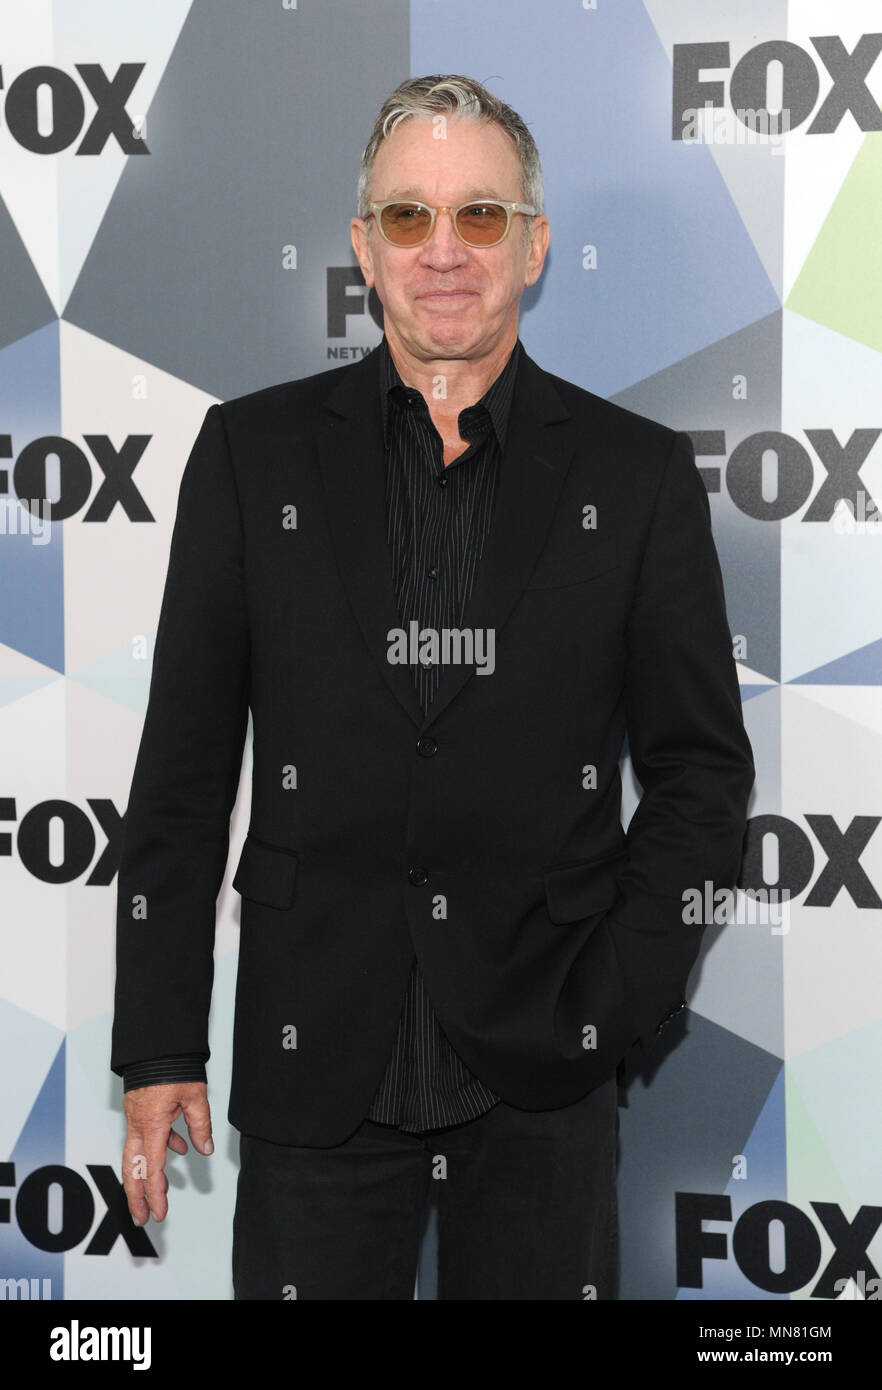 NEW YORK, NY - MAY 14: Tim Allen at the 2018 Fox Network Upfront at Wollman Rink, Central Park on May 14, 2018 in New York City. Credit: John Palmer/MediaPunch Stock Photo